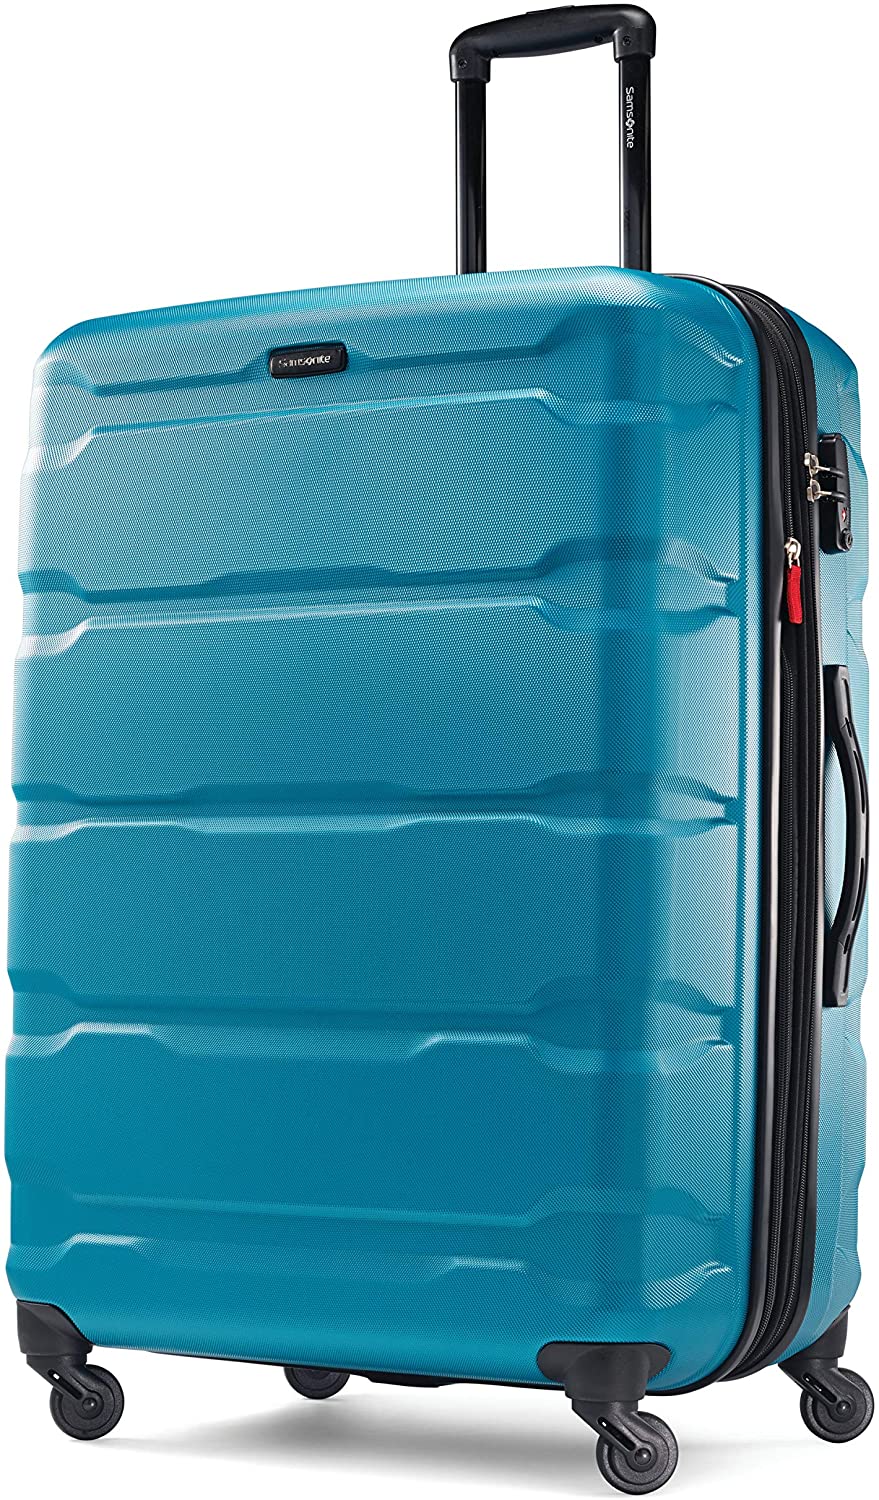 Samsonite Omni Scratch-Resistant Hardside Suitcase With Wheels, 28-Inch